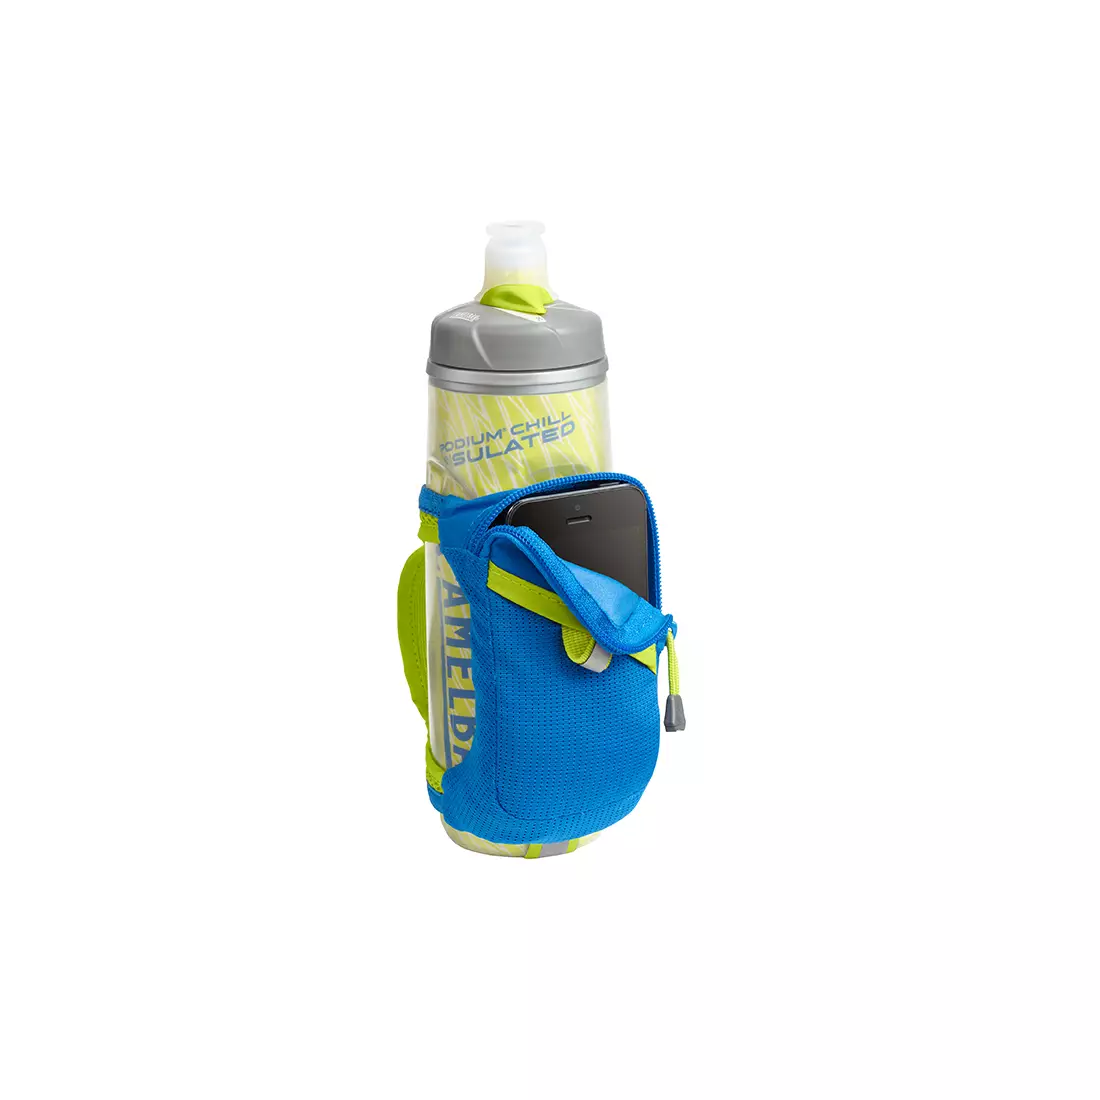 CAMELBAK Quick Grip Chill Thermoflasche 21oz/ 621 ml Electric Blue INTL 62432-IN SS16